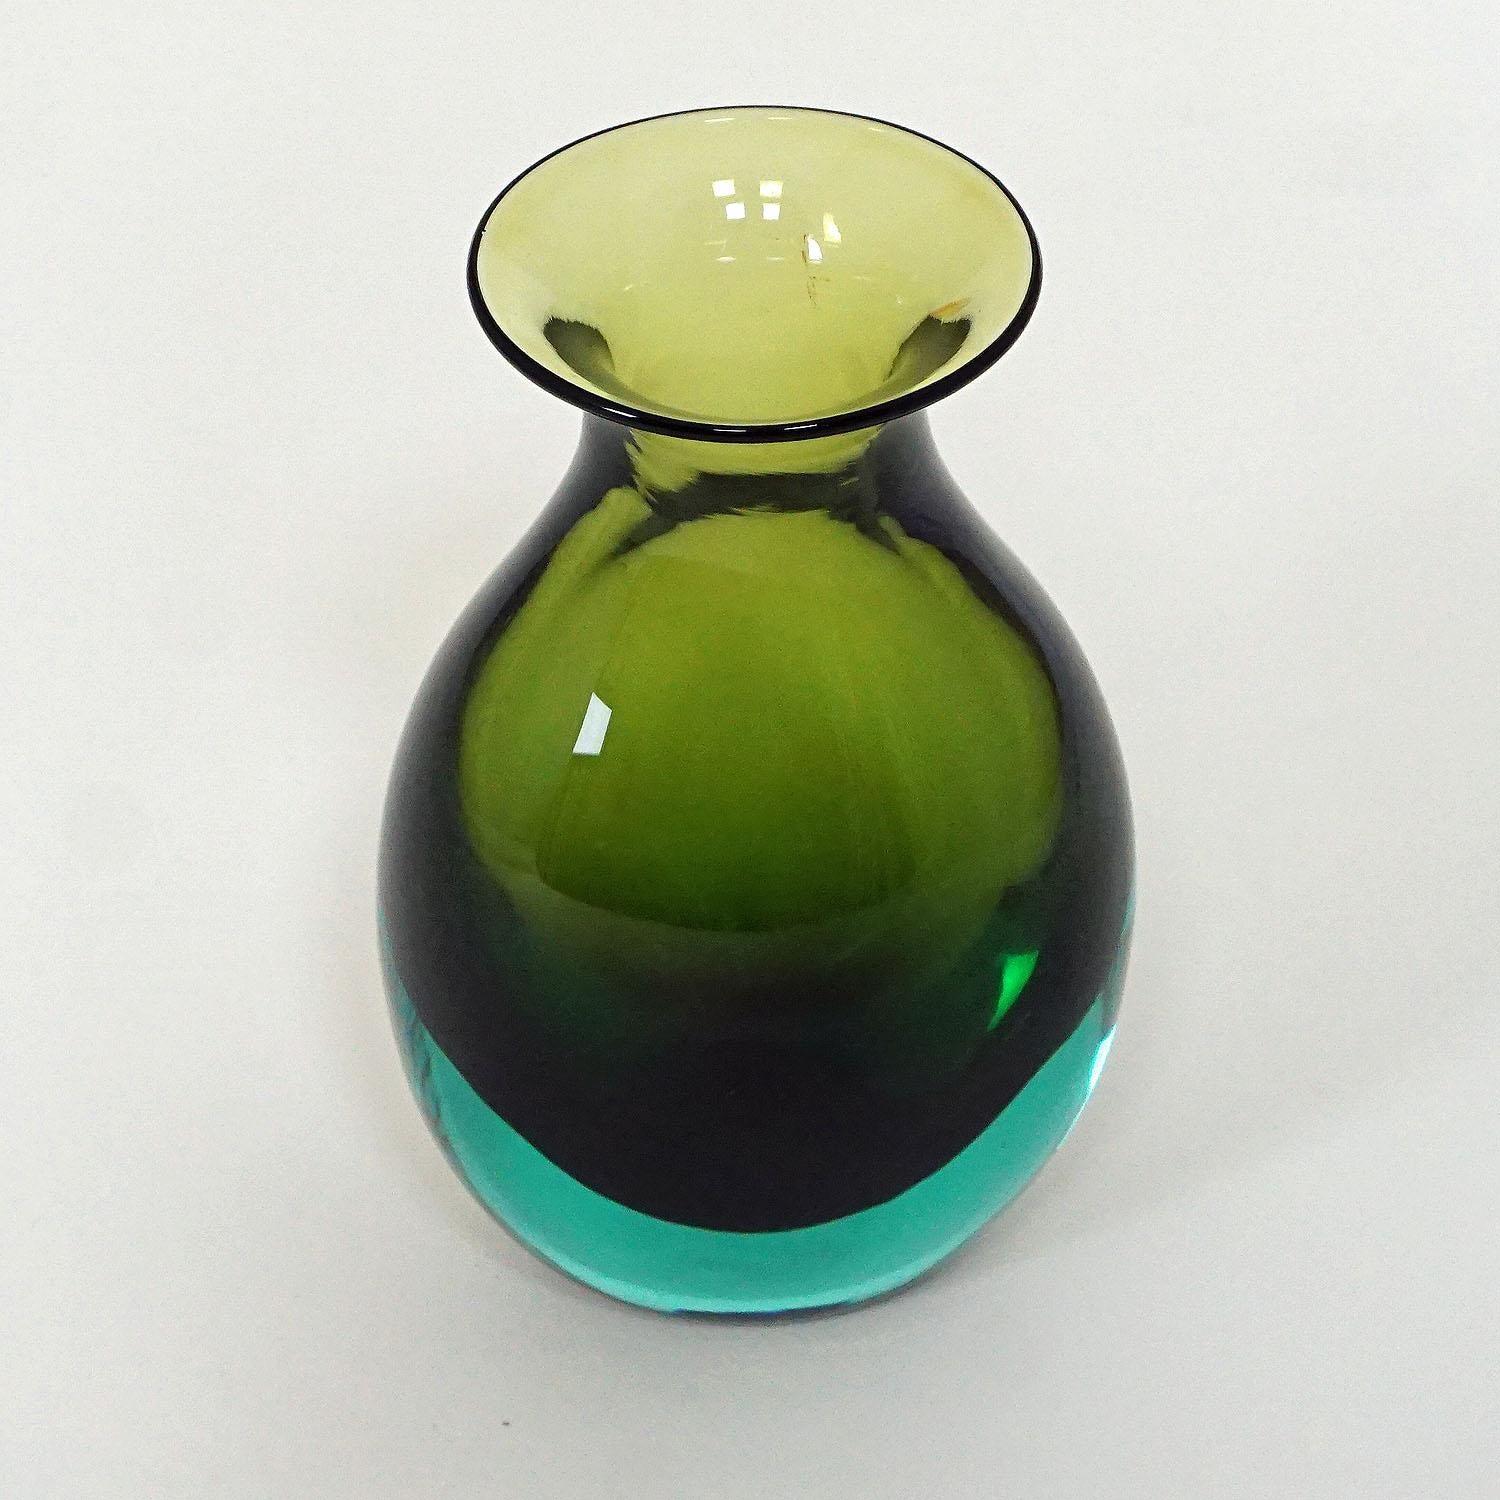 A nice Murano glass vase manufactured by vetreria Gino Cenedese and designed by Antonio da Ros in the 1960s. Green and turquoise Sommerso glass.

Measures: width 4.33